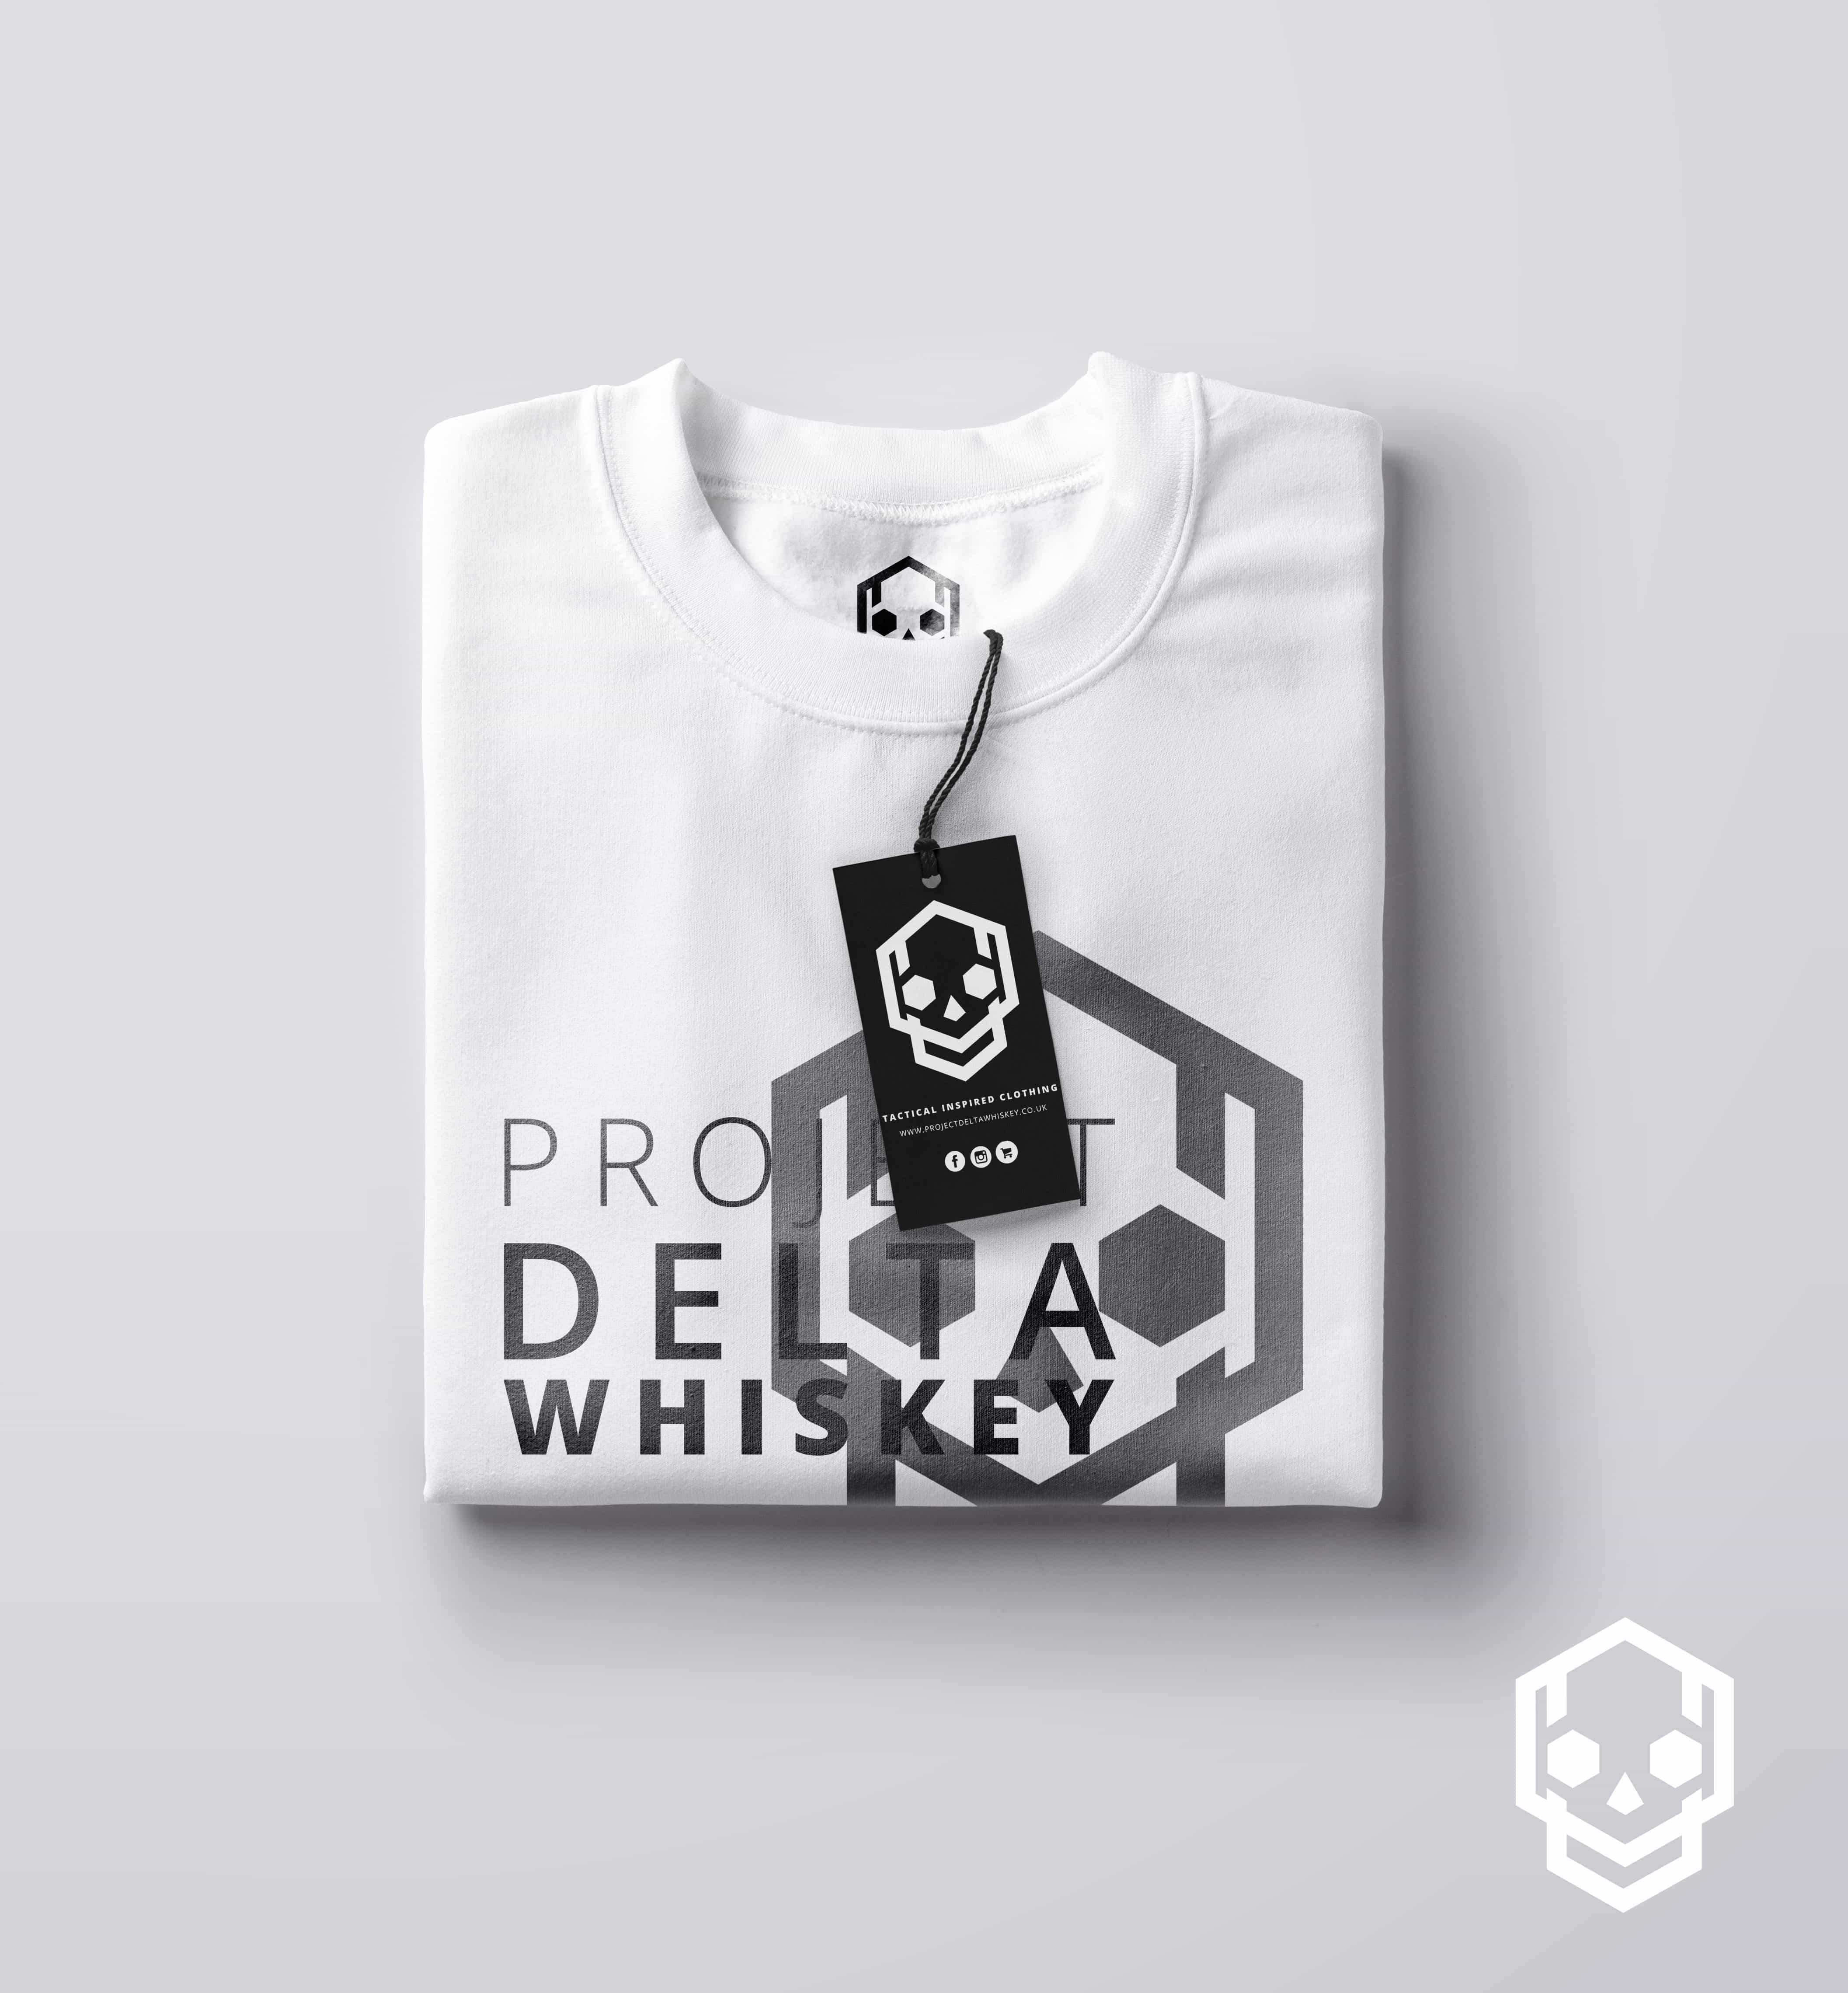 Black and White Airsoft Logo - PDW Emblem T Shirt. UK Airsoft T Shirts & Tops. Project Delta Whiskey